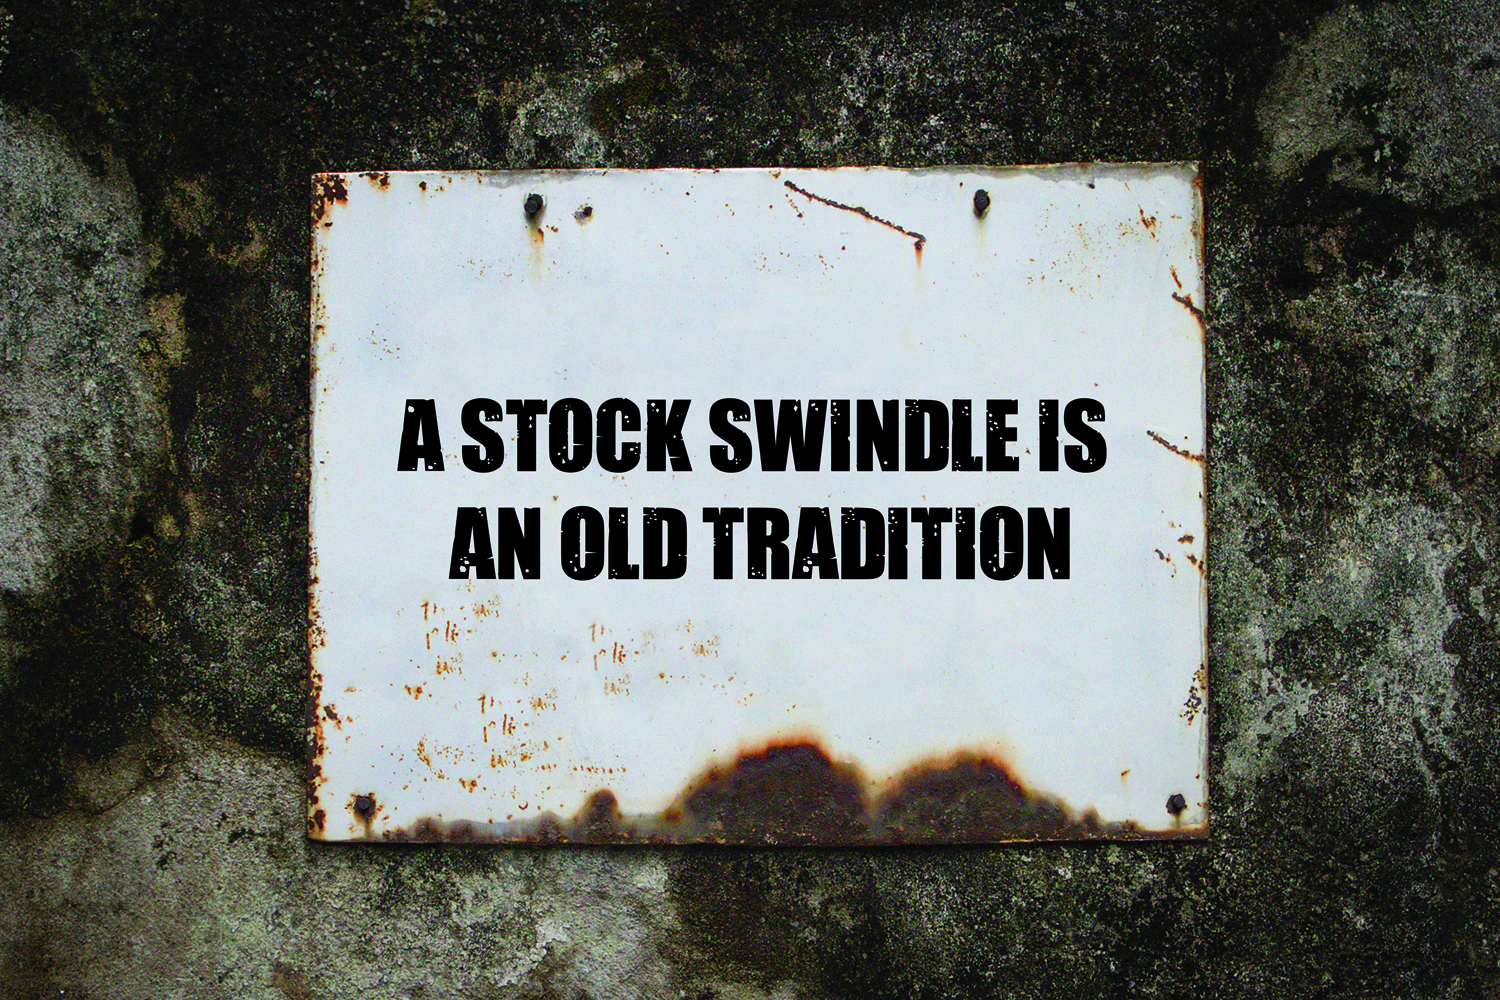 A stock swindle is an old tradition.